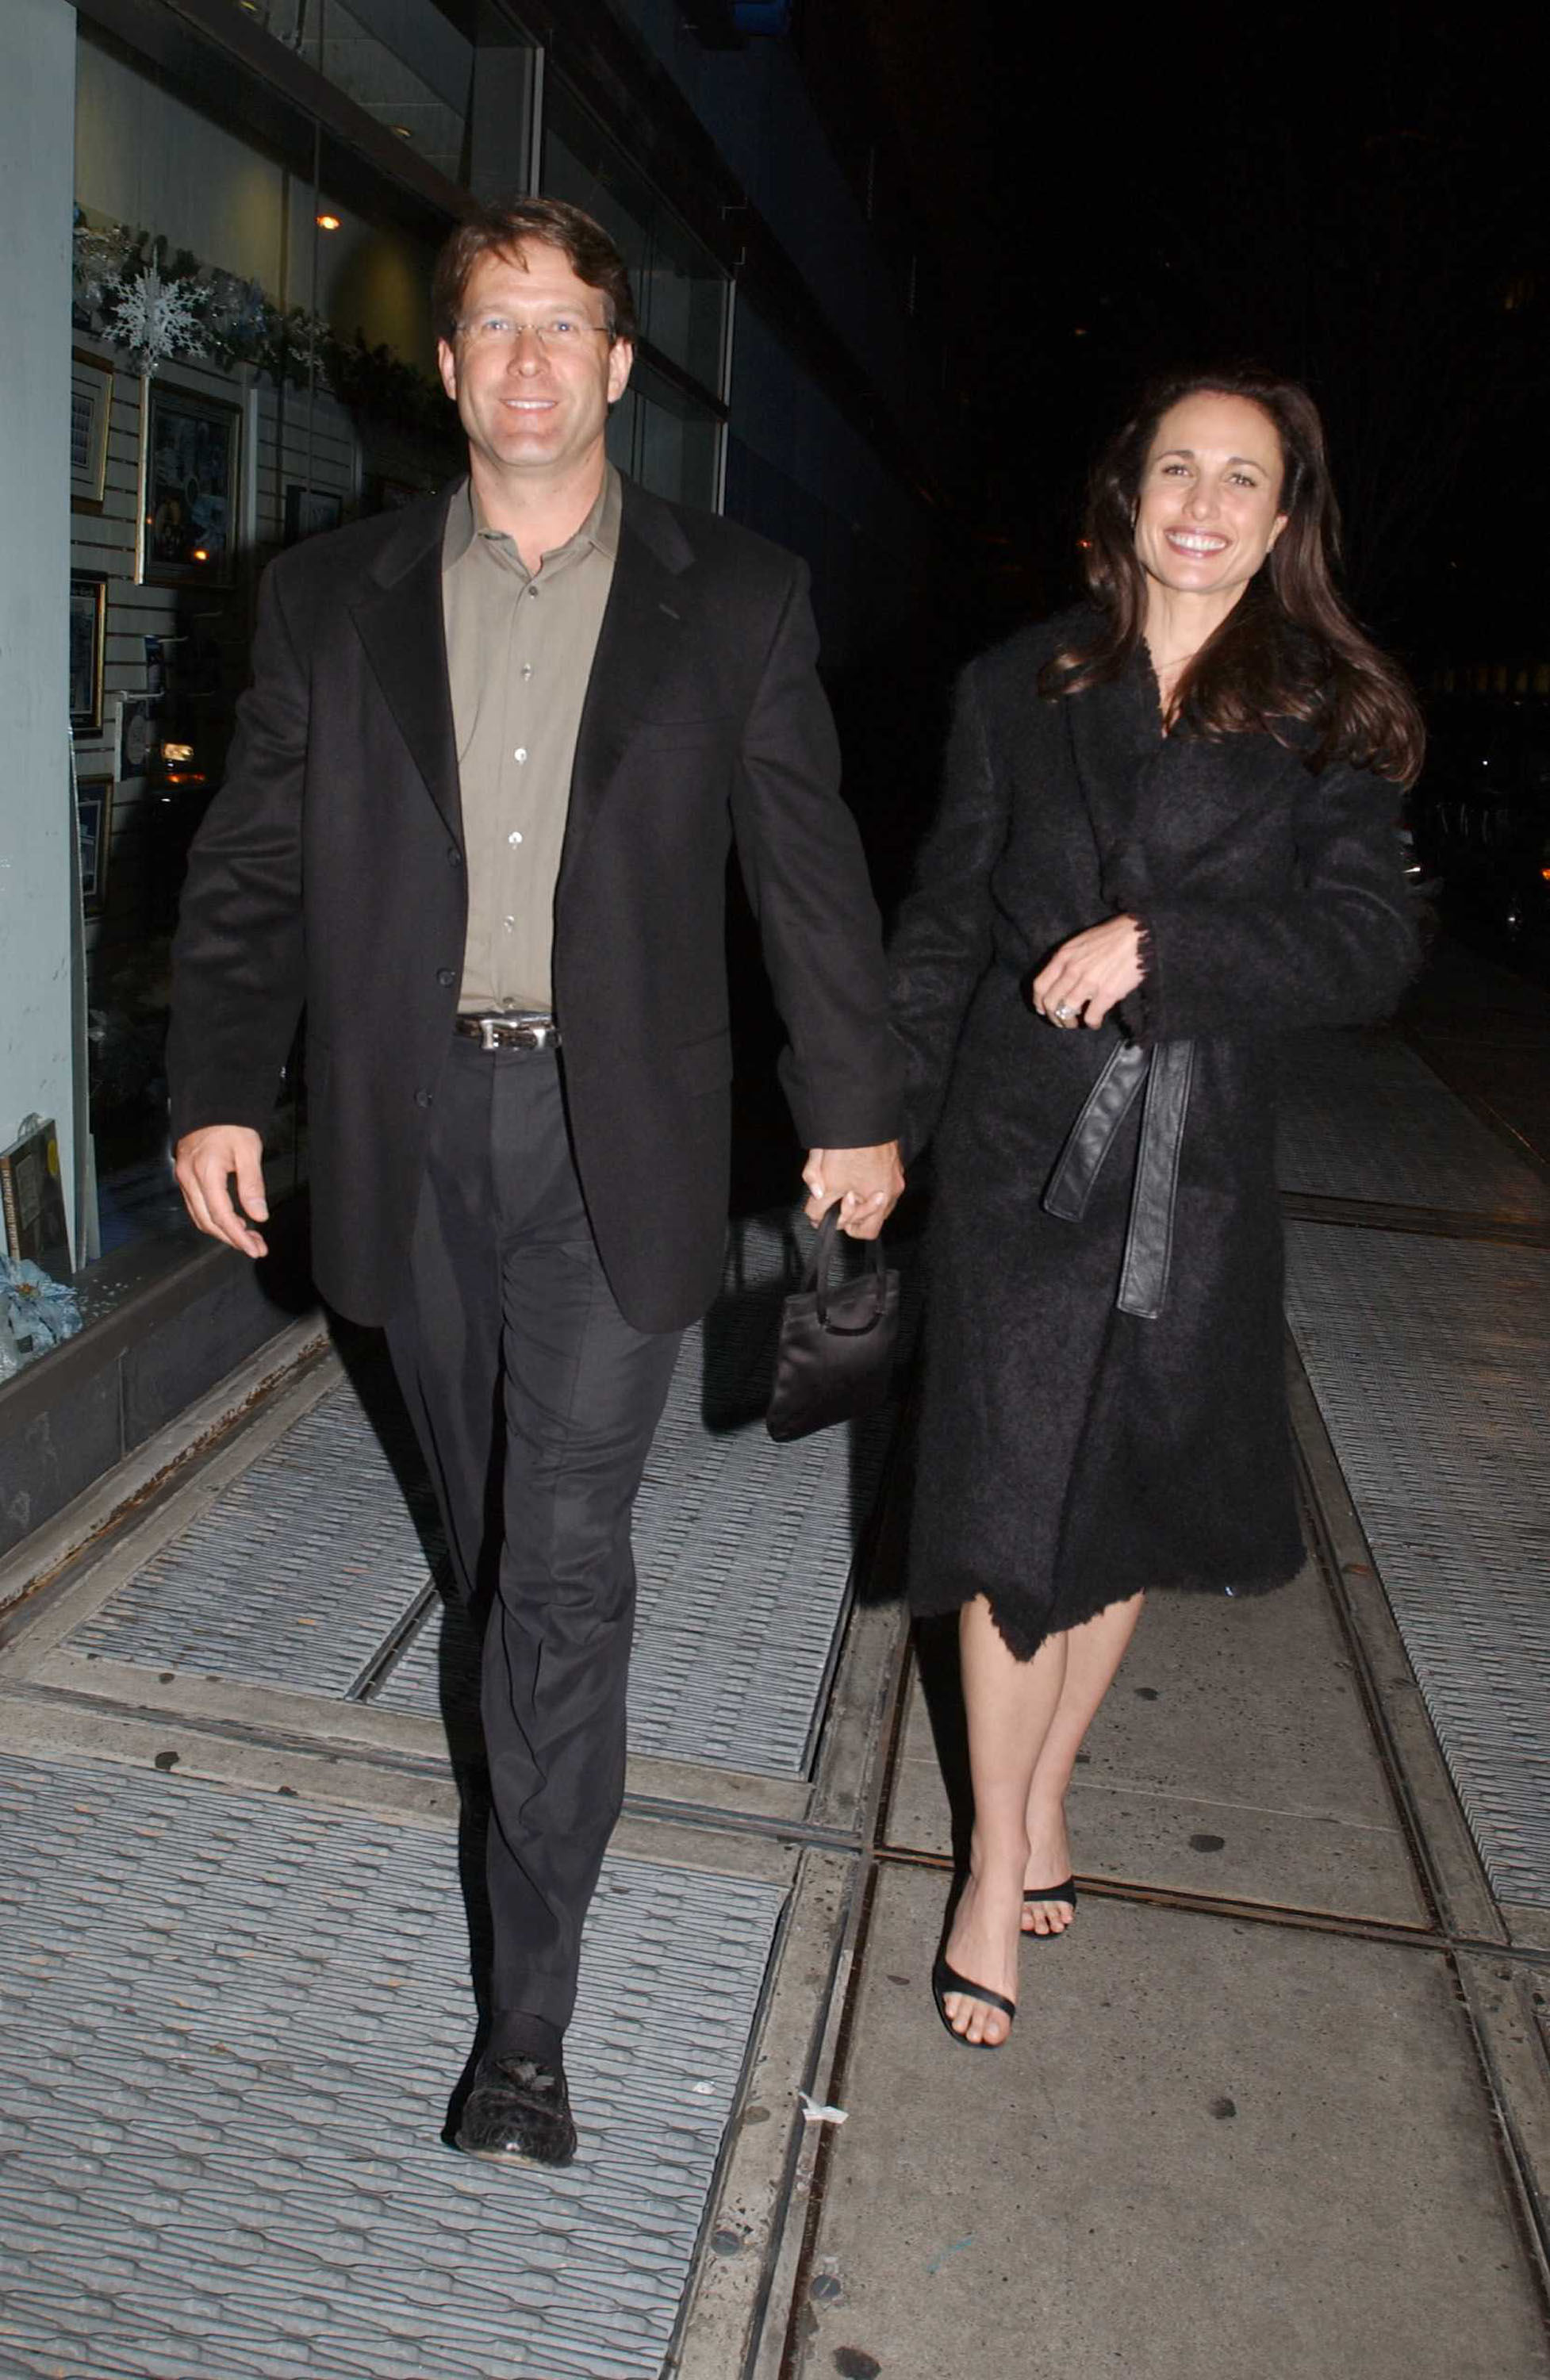 Rhett Hartzog and Andie MacDowell photographed together on December 4, 2001, in New York City. | Source: Getty Images